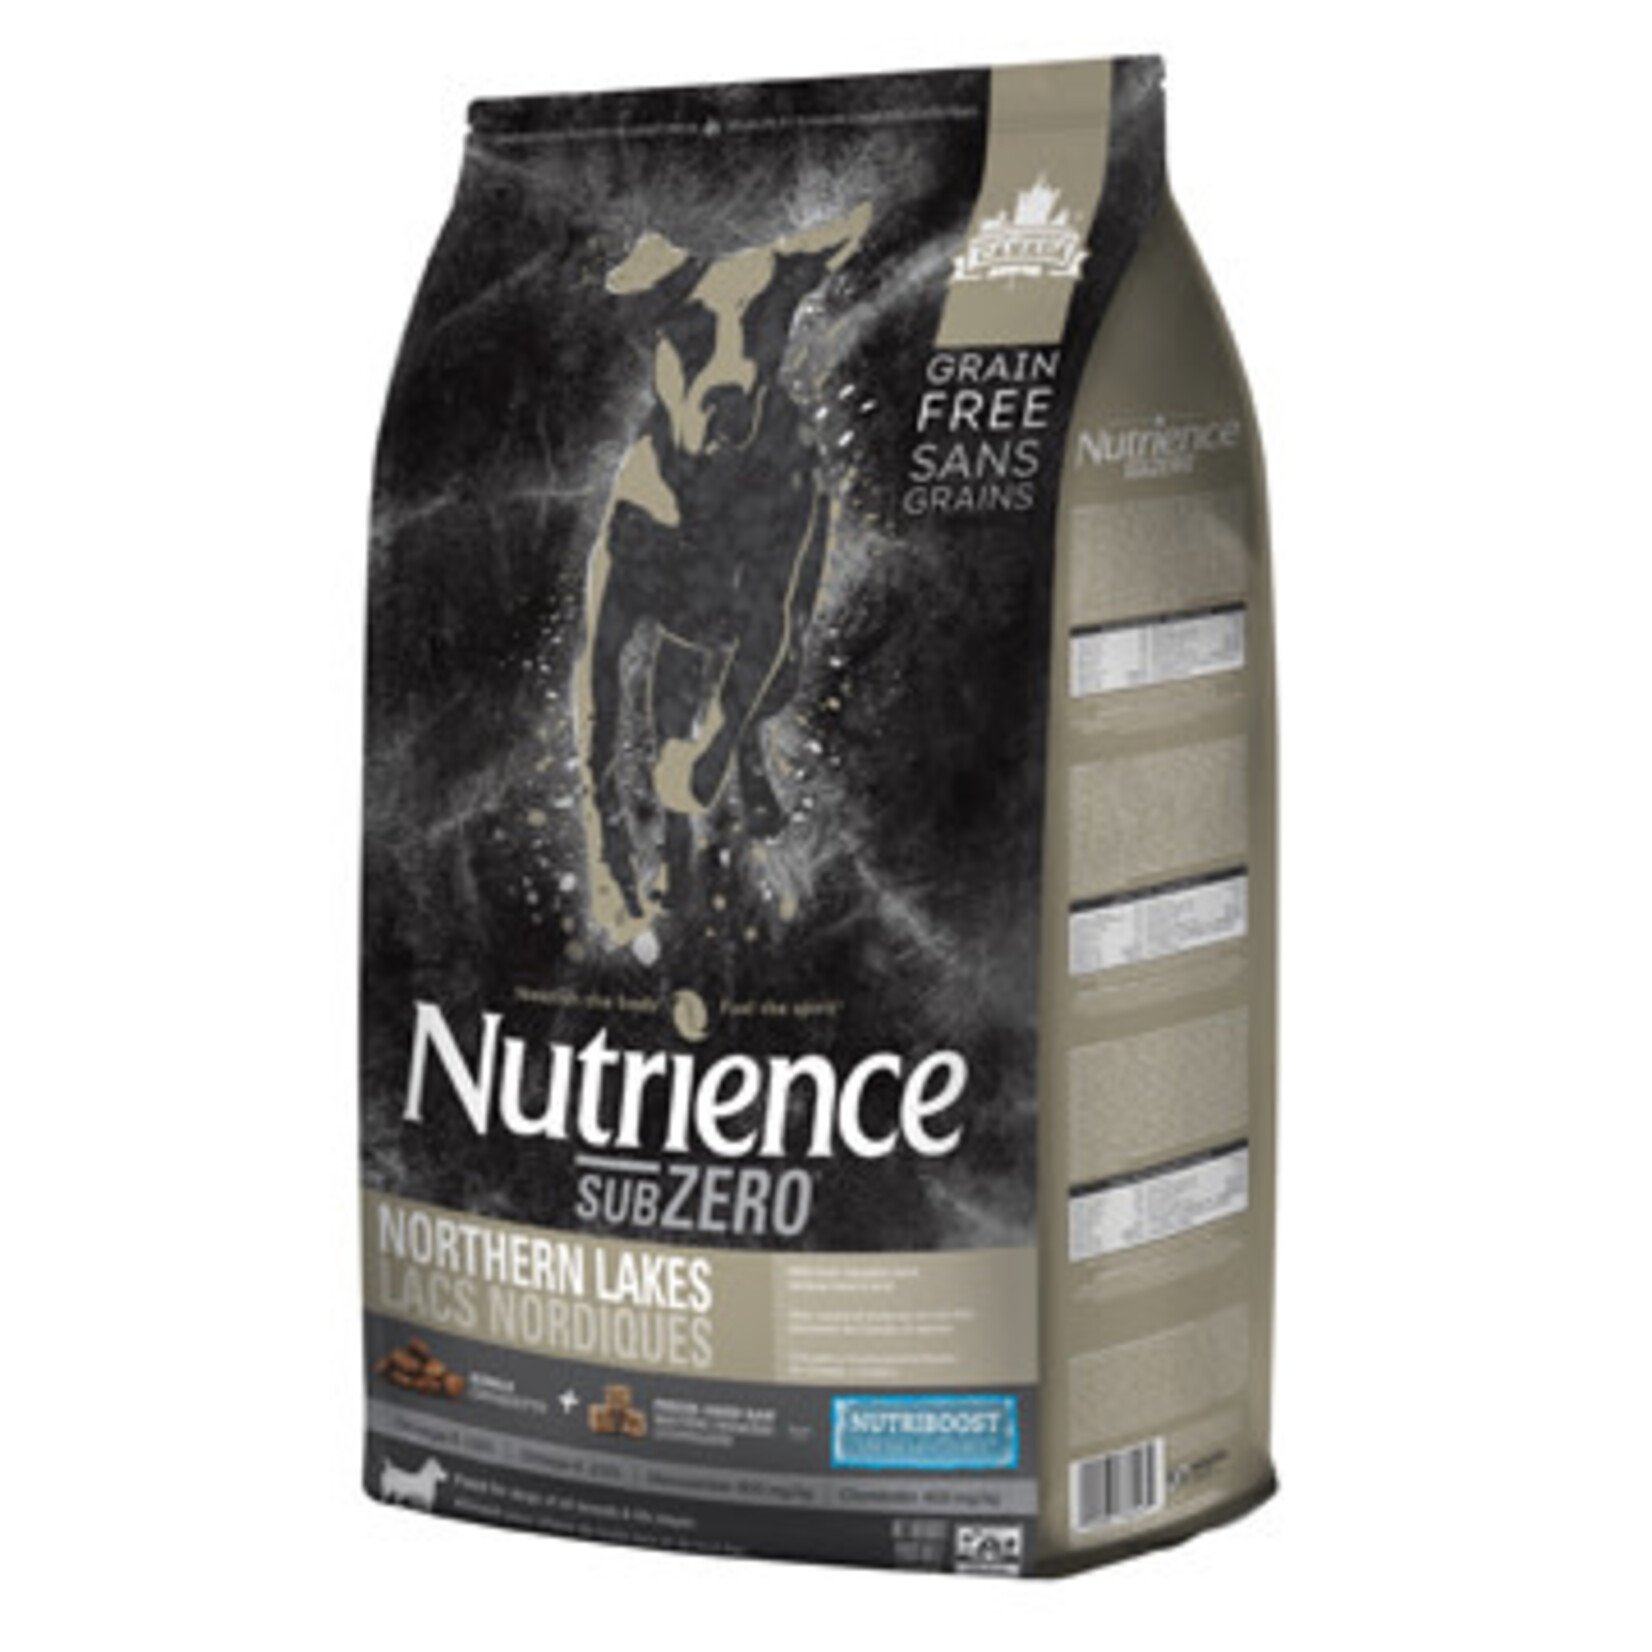 NUTRIENCE Nutrience Grain Free Subzero Northern Lakes for Dogs - 10 kg (22 lbs)